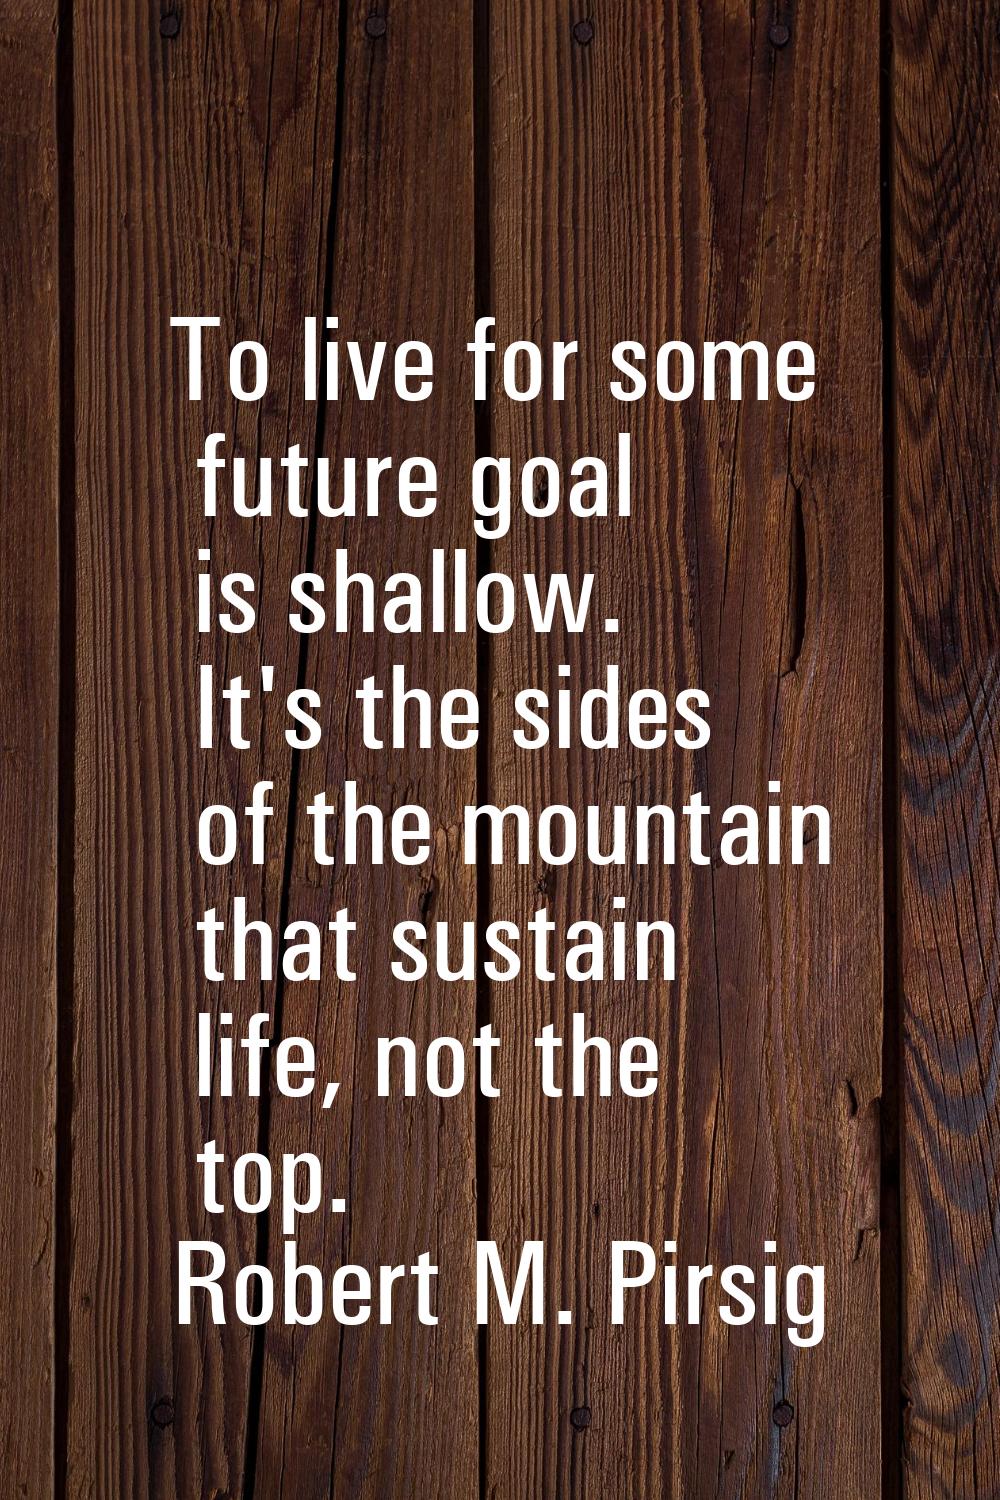 To live for some future goal is shallow. It's the sides of the mountain that sustain life, not the 